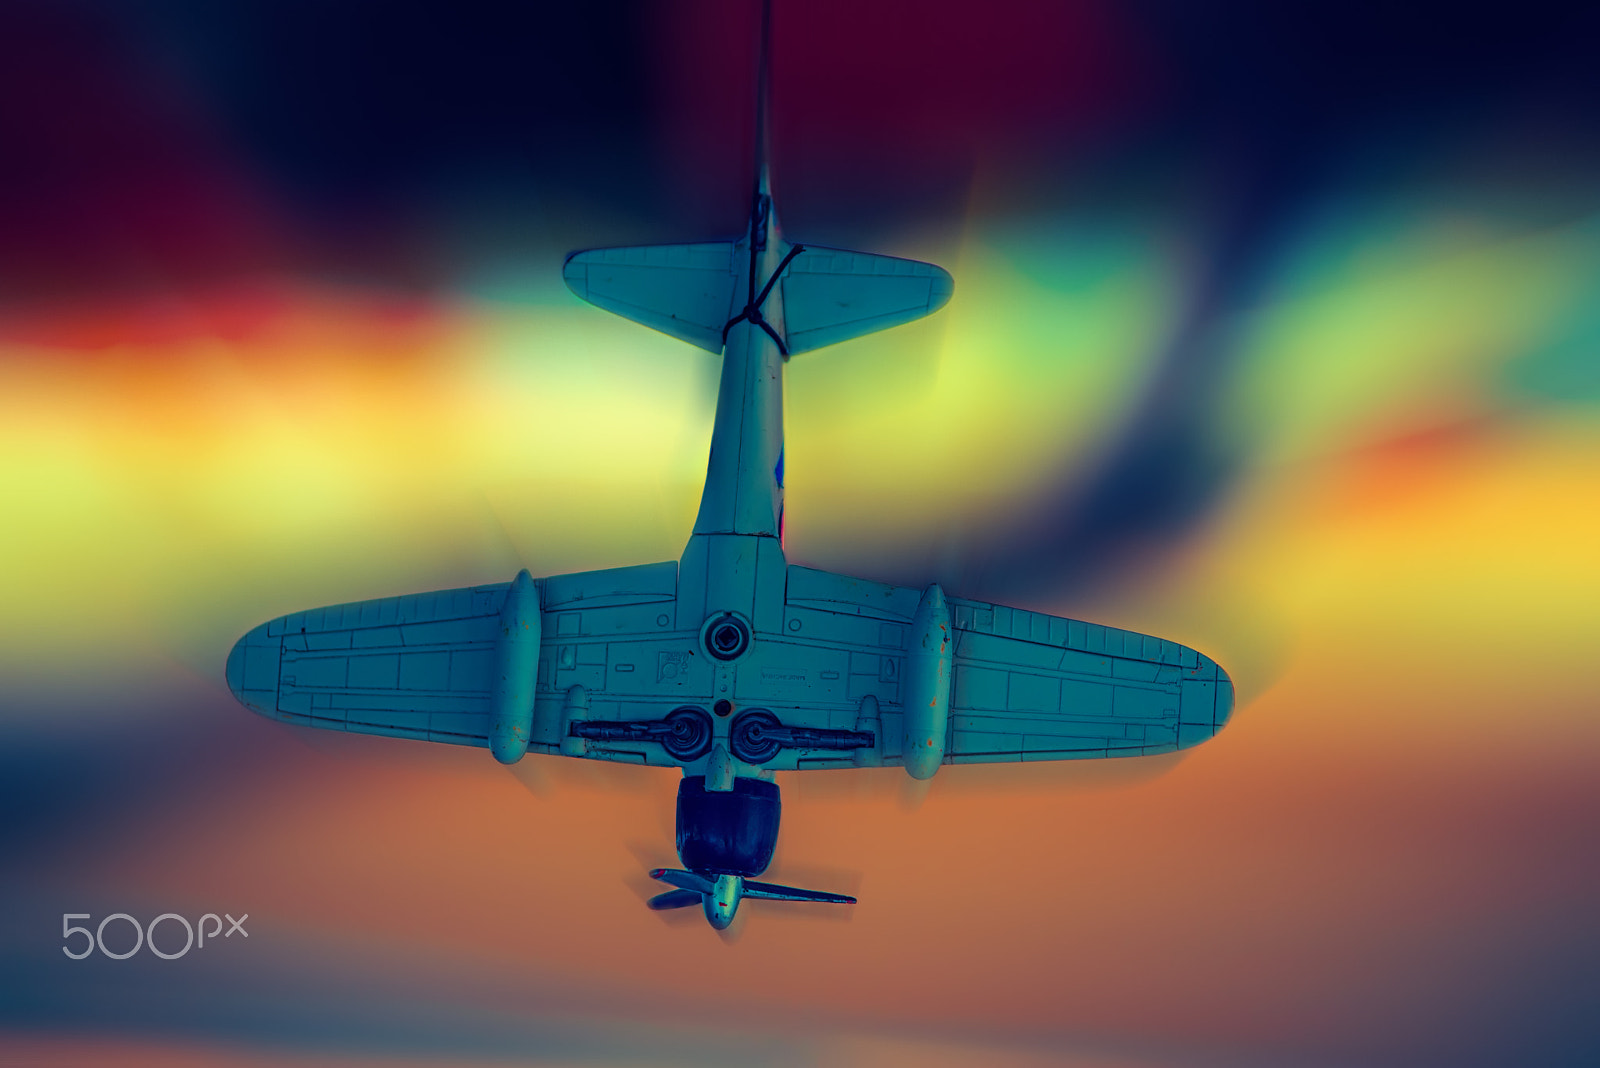 Nikon D610 sample photo. A toy model of an airplane with bokeh background. photography